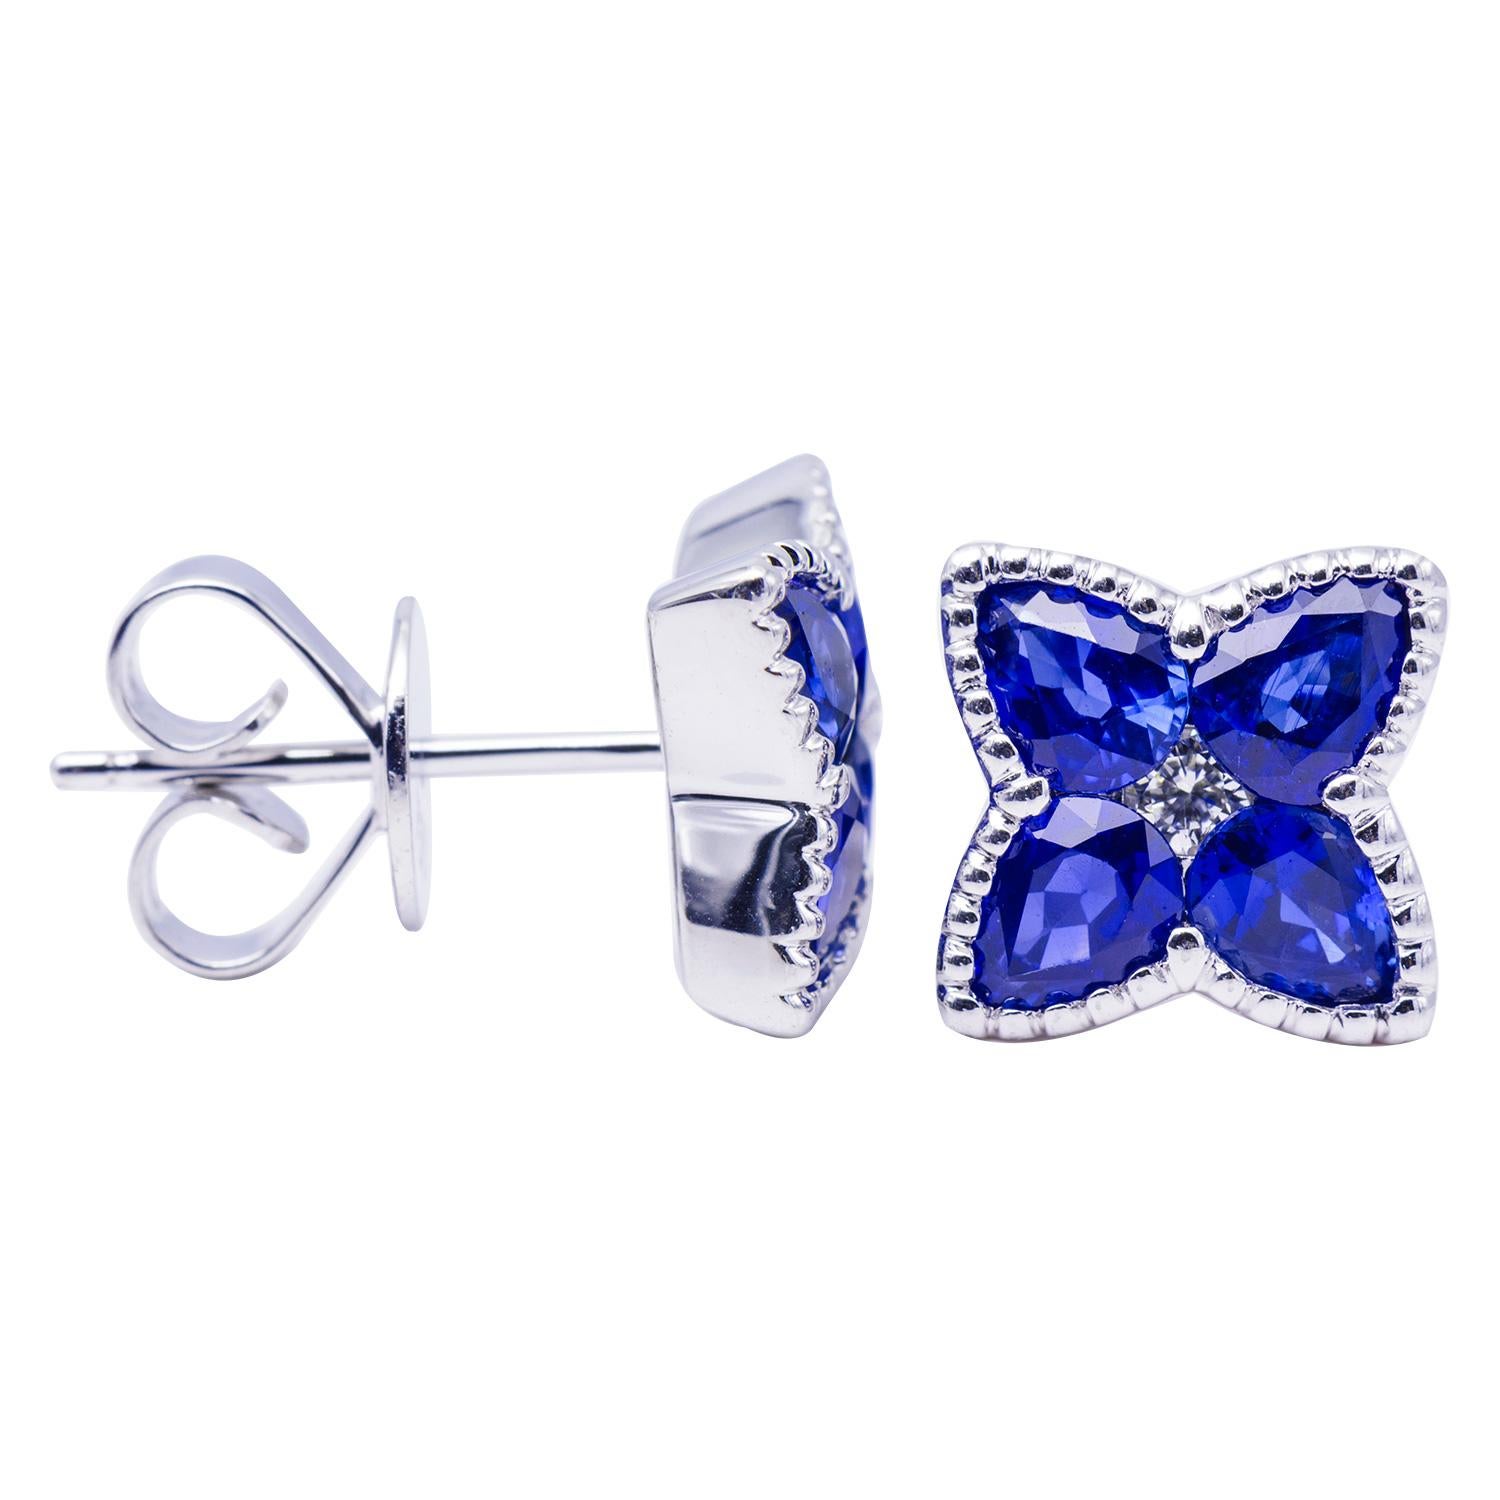 These stunning earrings are made from 8 drop shape sapphires totaling 2 carats with 2 round VS2, G color diamonds in the center totaling 0.08 carats. Around the sapphires is beautiful goldwork made out of 3 grams of 18 karat white gold. These